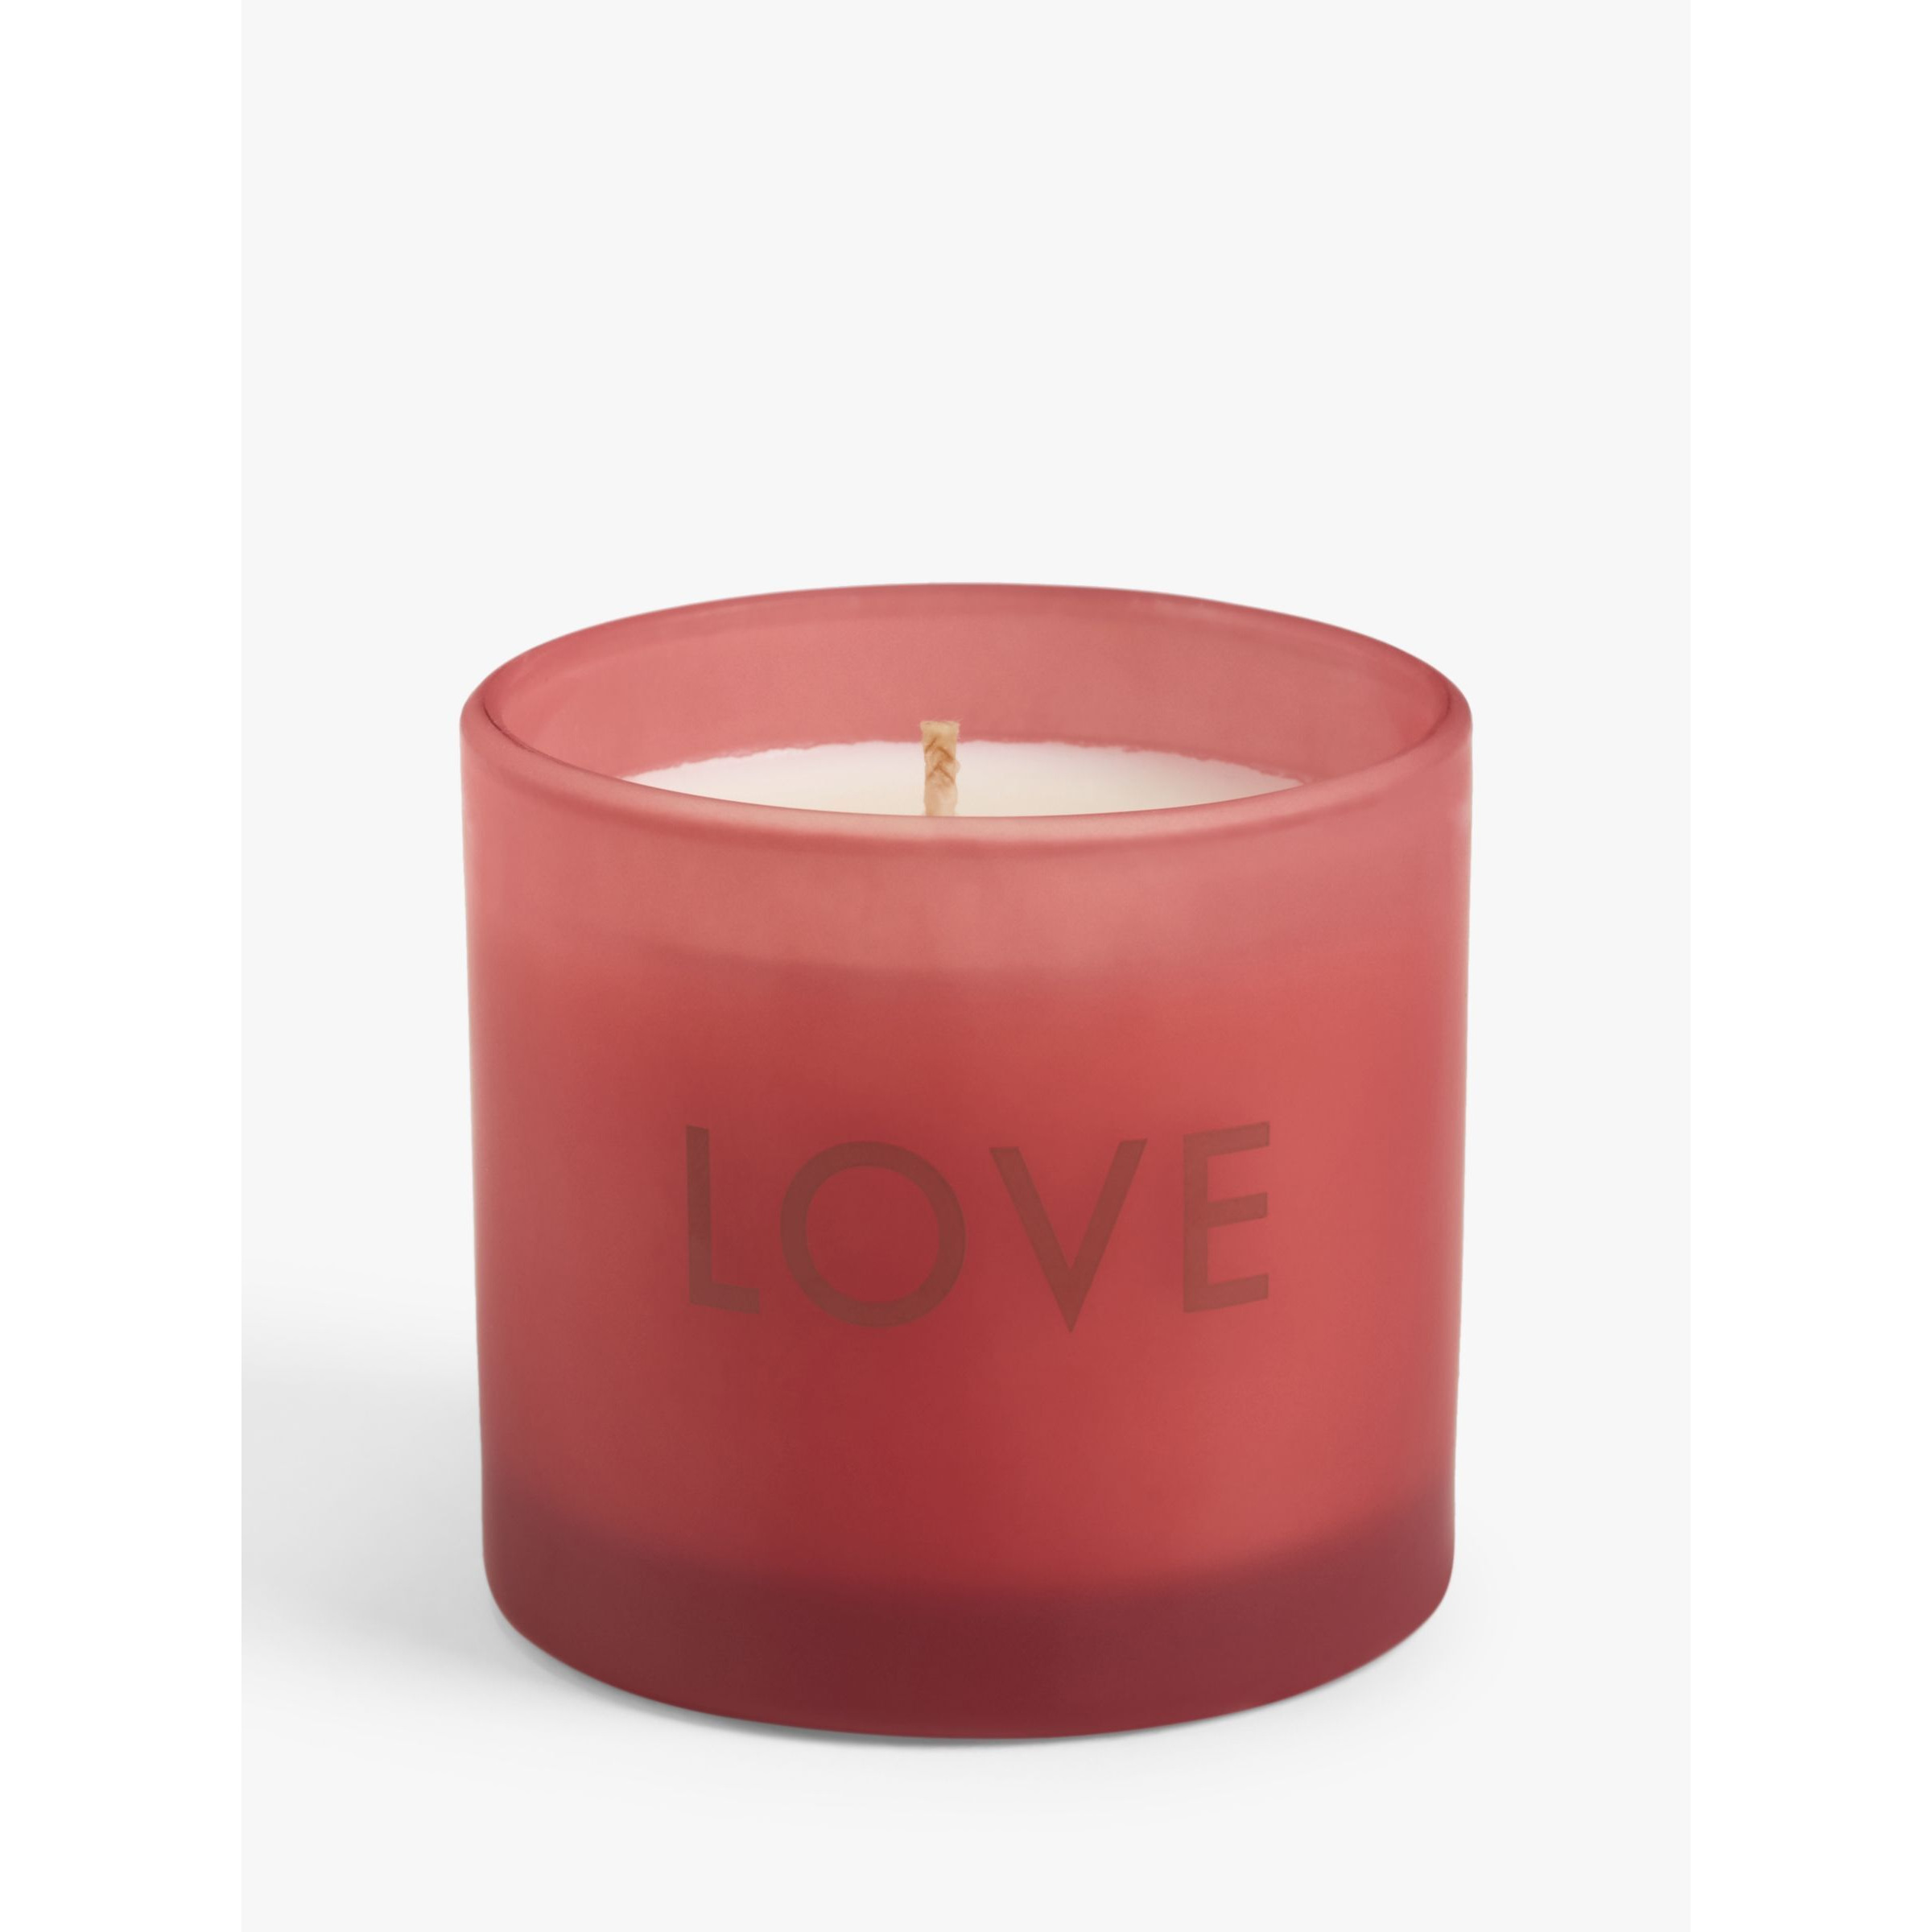 John Lewis Sentiments Love Scented Candle, 115g - image 1